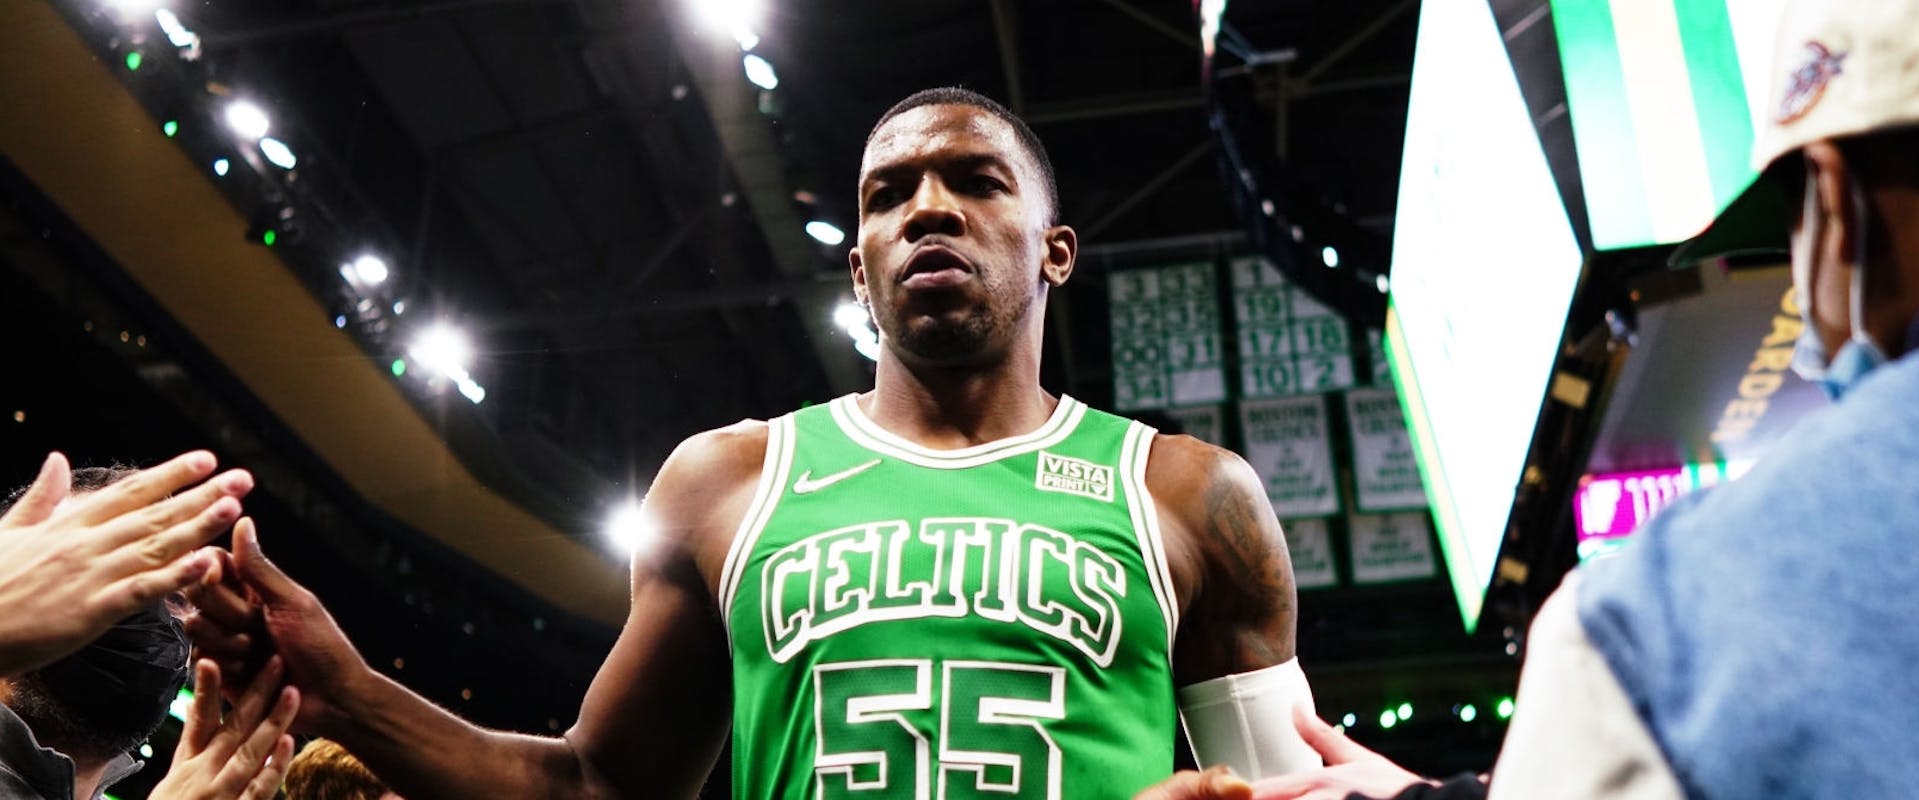 Joe Johnson #55 of the Boston Celtics leaves the court after the game against the Cleveland Cavaliers at TD Garden on December 22, 2021 in Boston, Massachusetts.